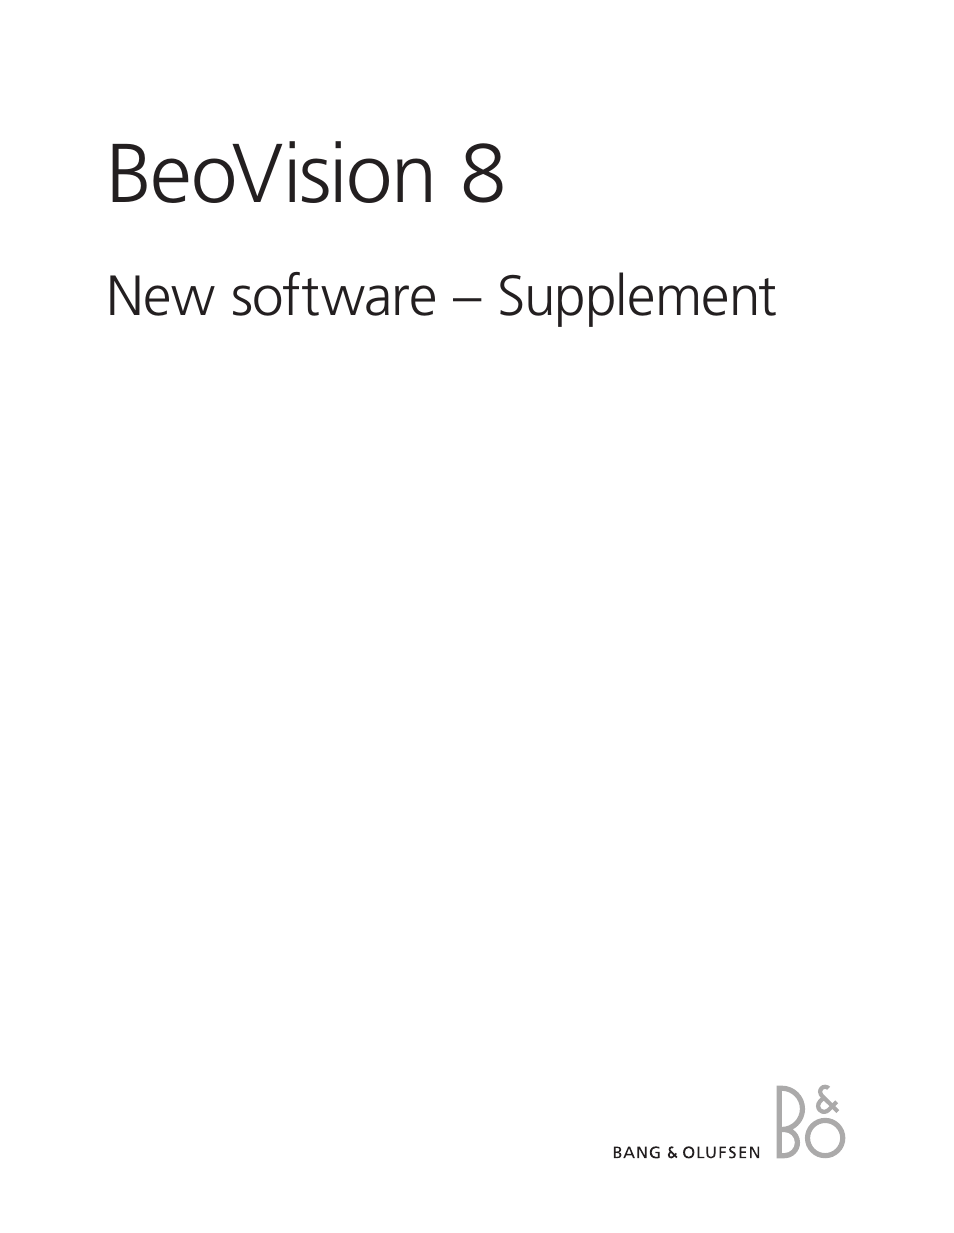 BeoVision 8-40 Supplement to User Guide (pre Aug 2010)